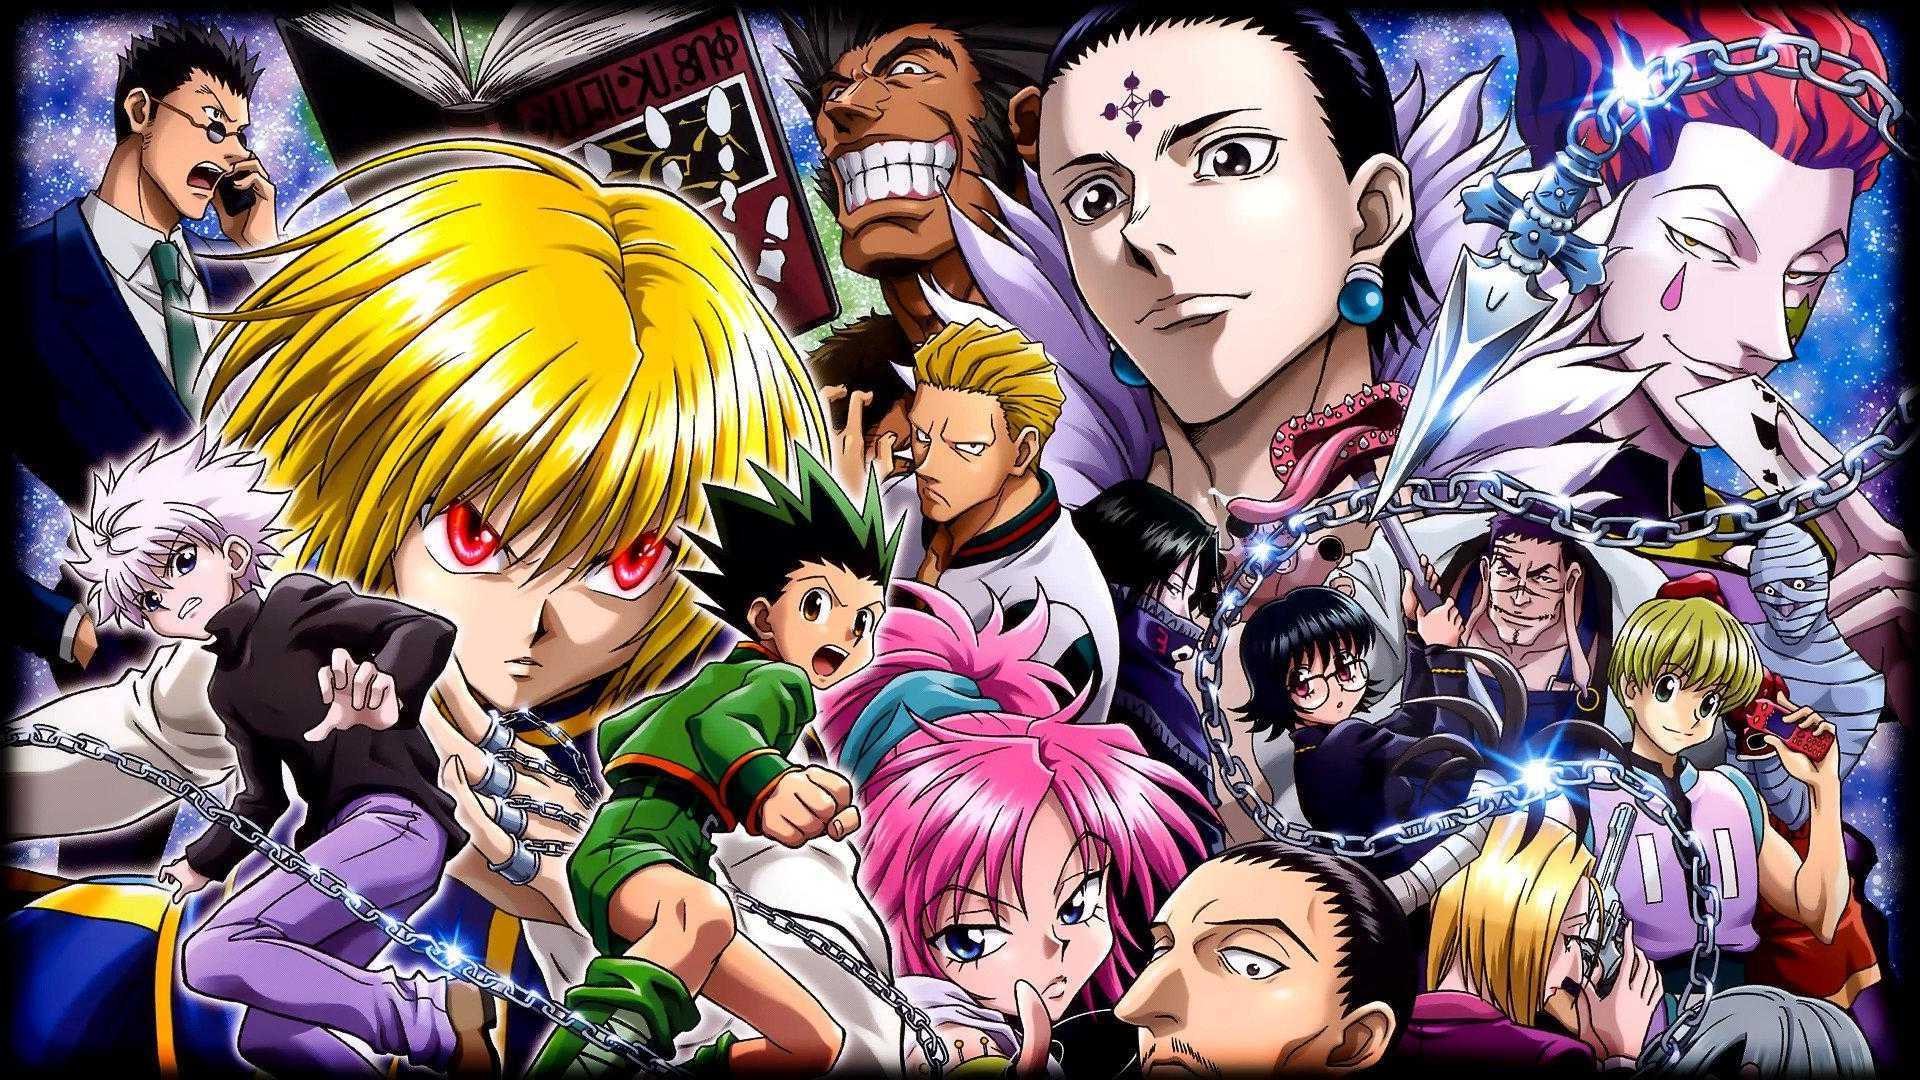 TogashiTweets on X: What's your favorite Hunter x Hunter arc?   / X